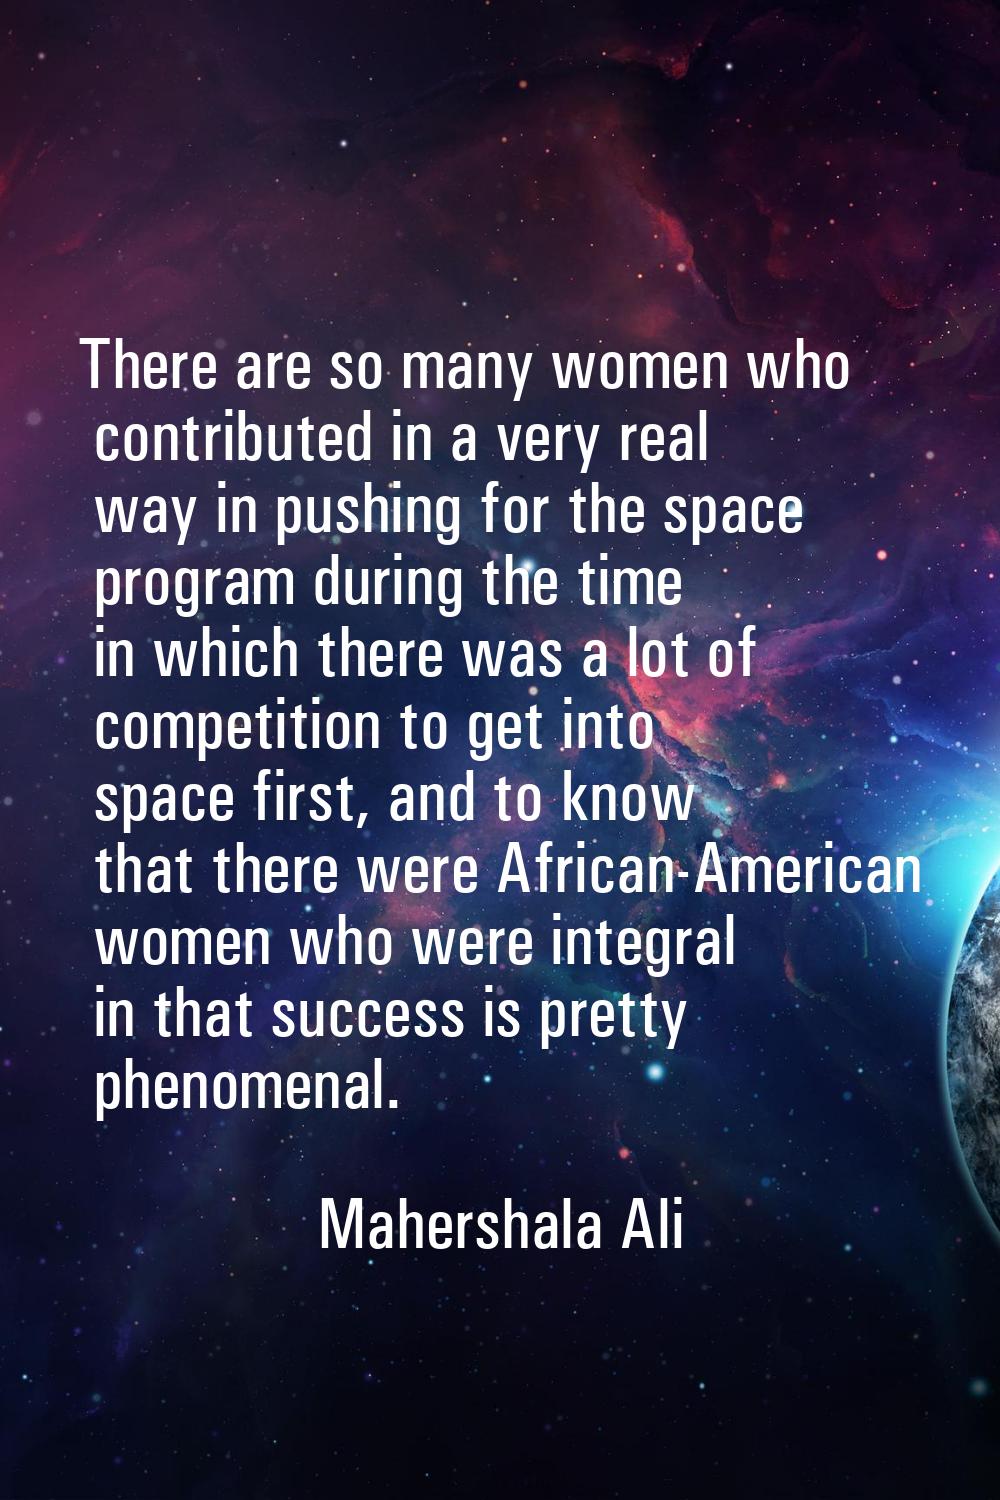 There are so many women who contributed in a very real way in pushing for the space program during 